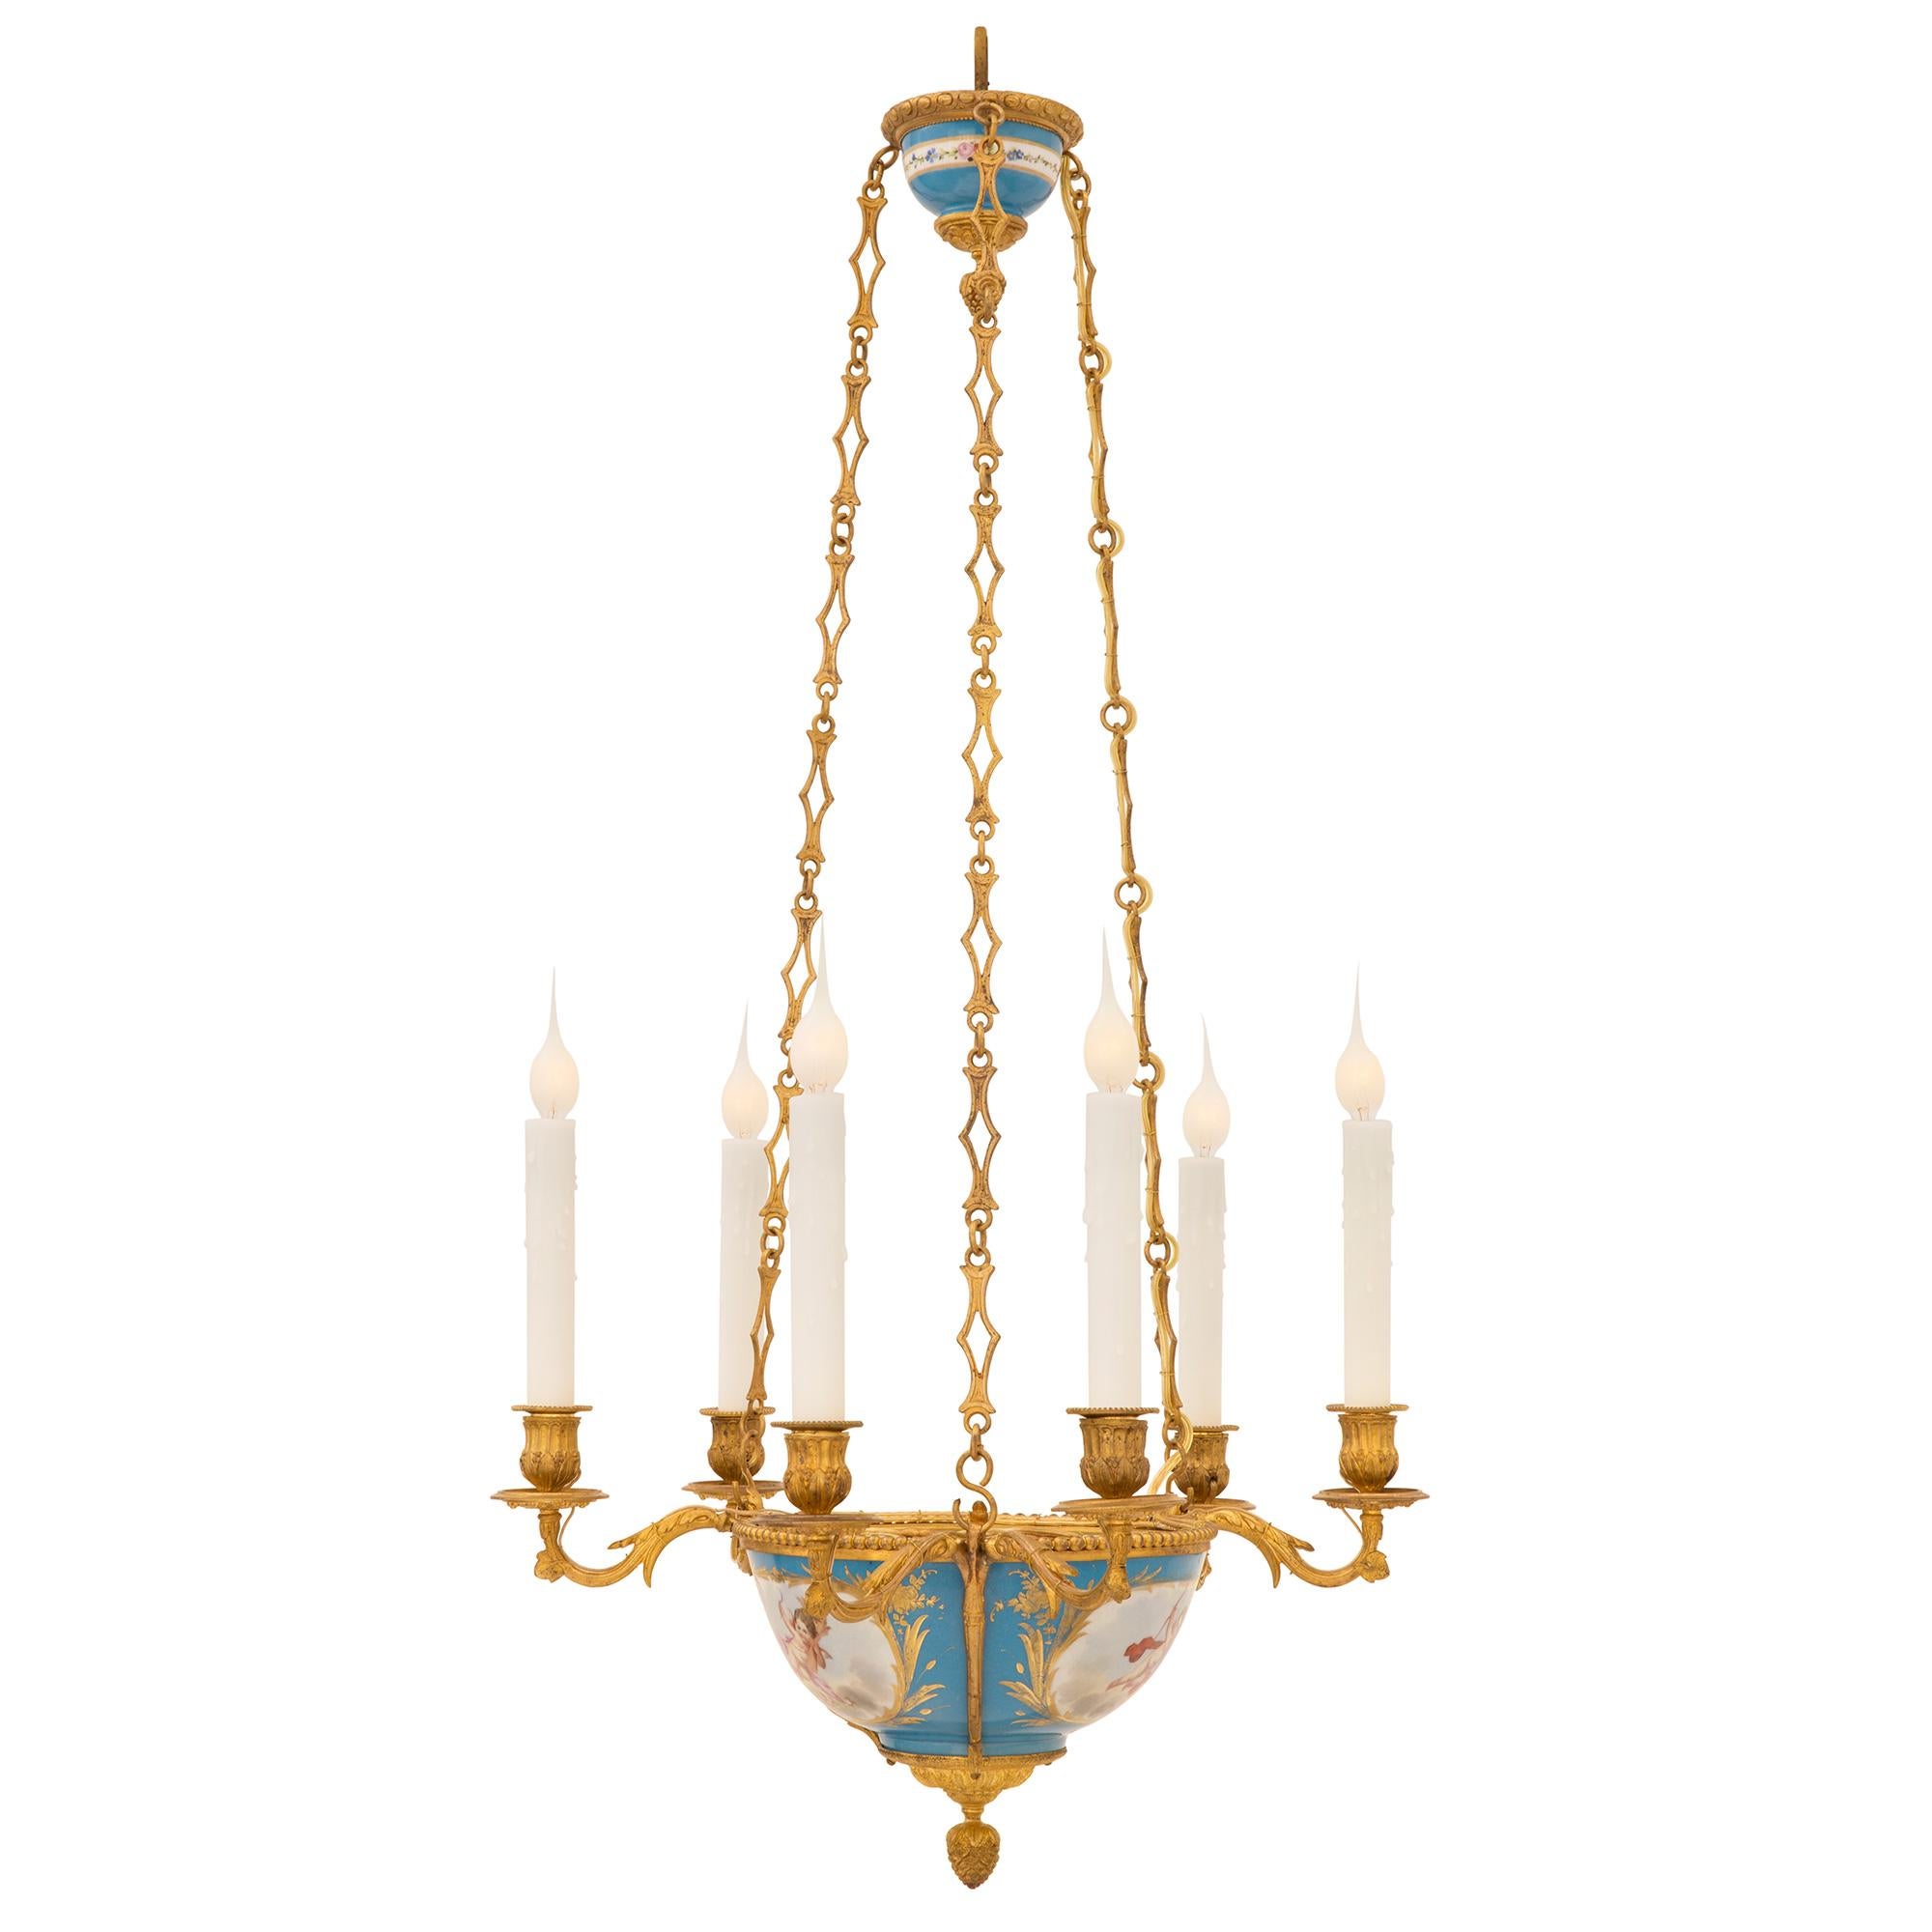 A very elegant and most decorative French 19th century Louis XVI st. ormolu and Sèvres porcelain chandelier. The six light chandelier is centered by a fine bottom acorn finial amidst lovely foliate designs. The beautiful Sévres porcelain body